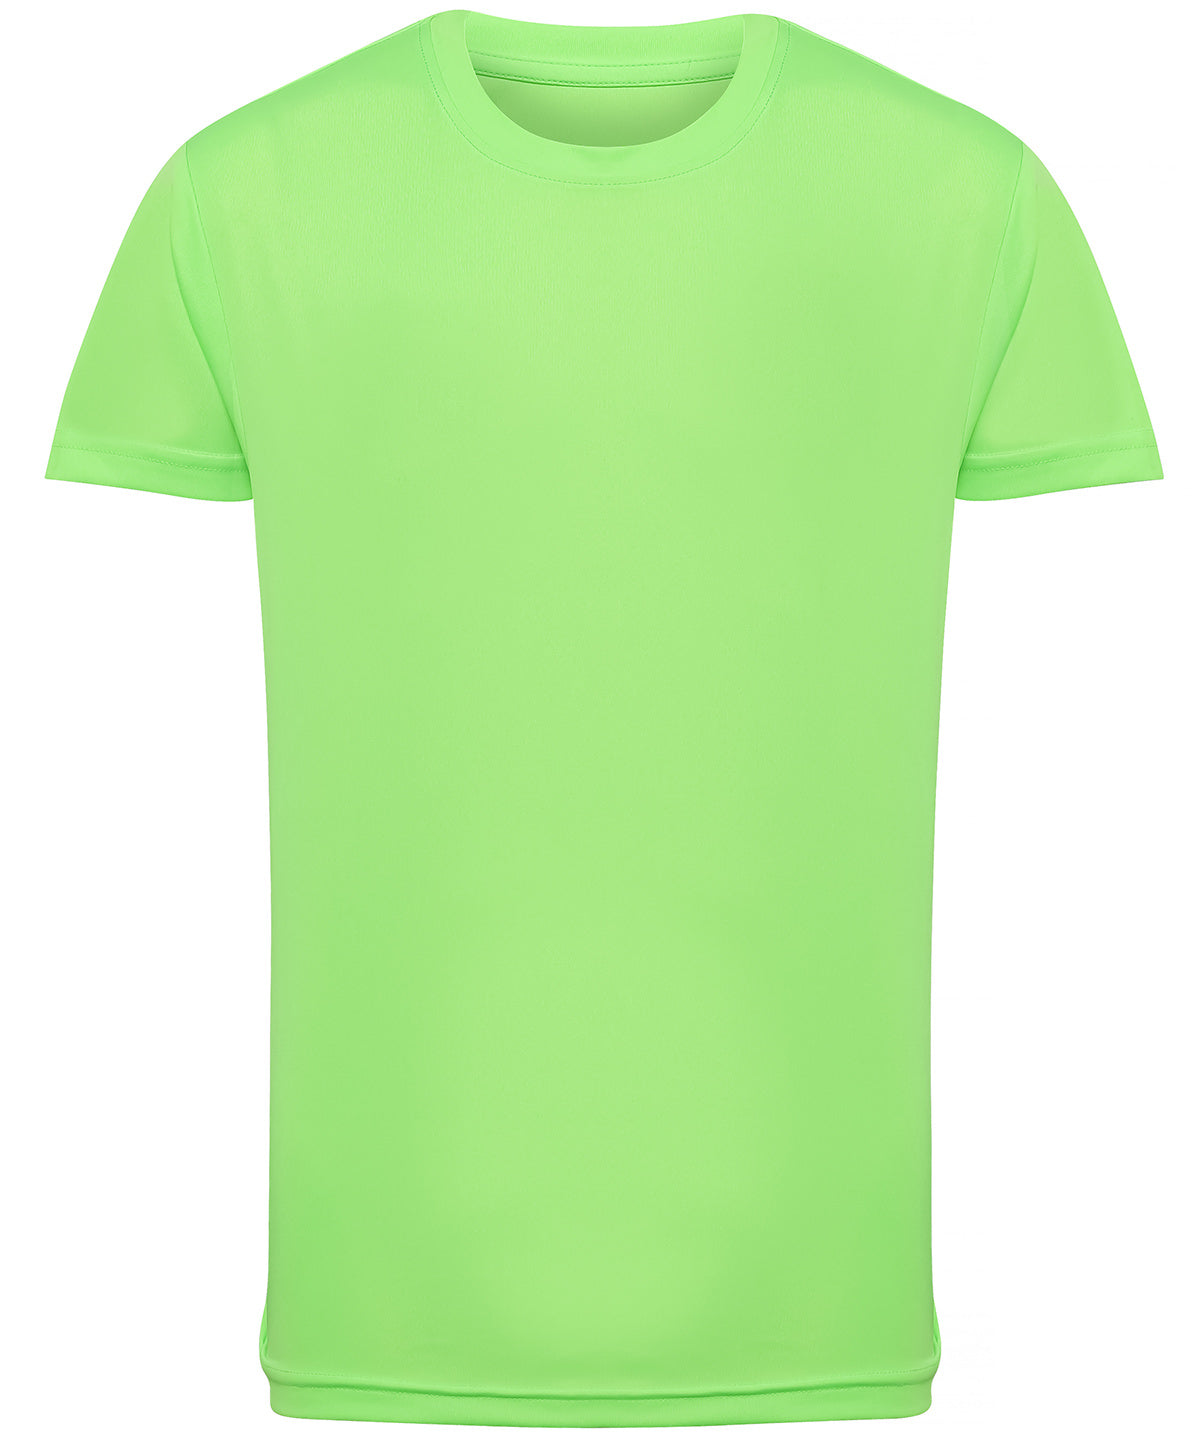 Lightning Green - Kids TriDri® performance t-shirt T-Shirts TriDri® Activewear & Performance, Exclusives, Junior, Must Haves, Sports & Leisure, T-Shirts & Vests Schoolwear Centres